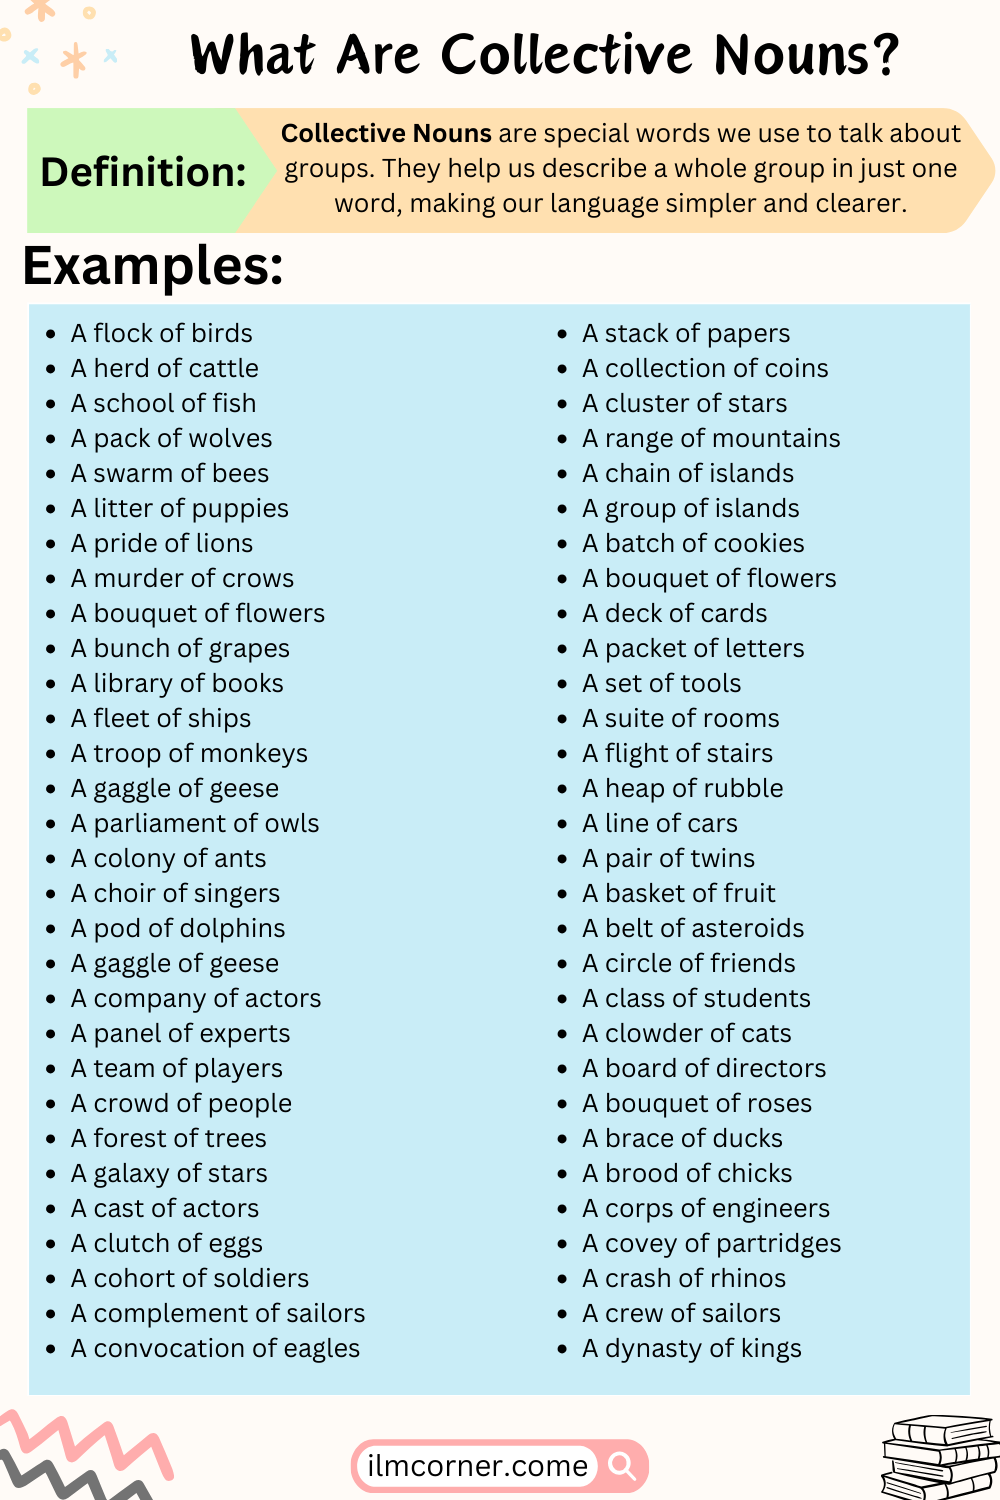 Collective Nouns and Their 100 Examples